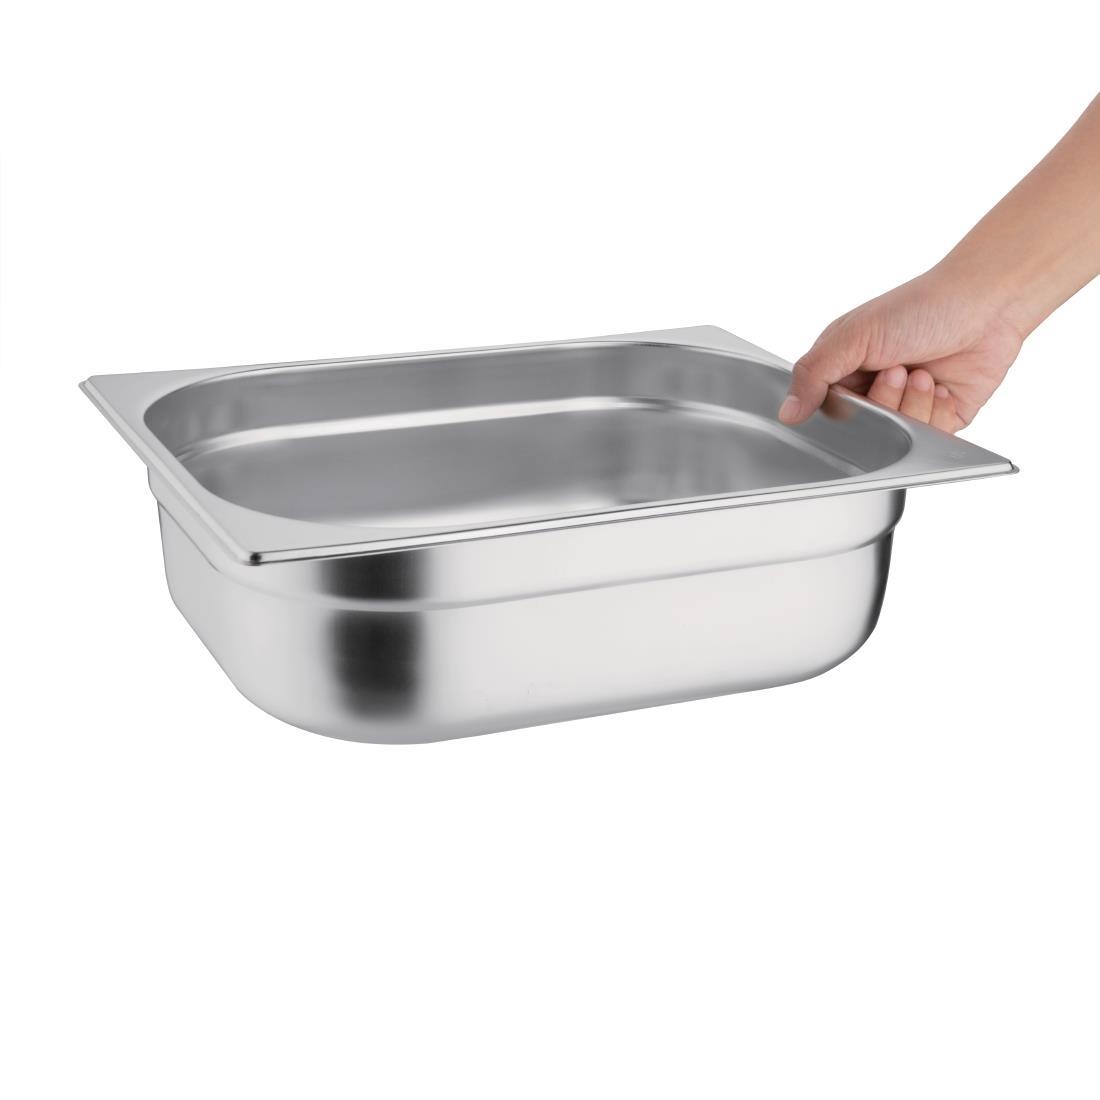 Vogue Stainless Steel 1/2 Gastronorm Pan 100mm - K928  - 5